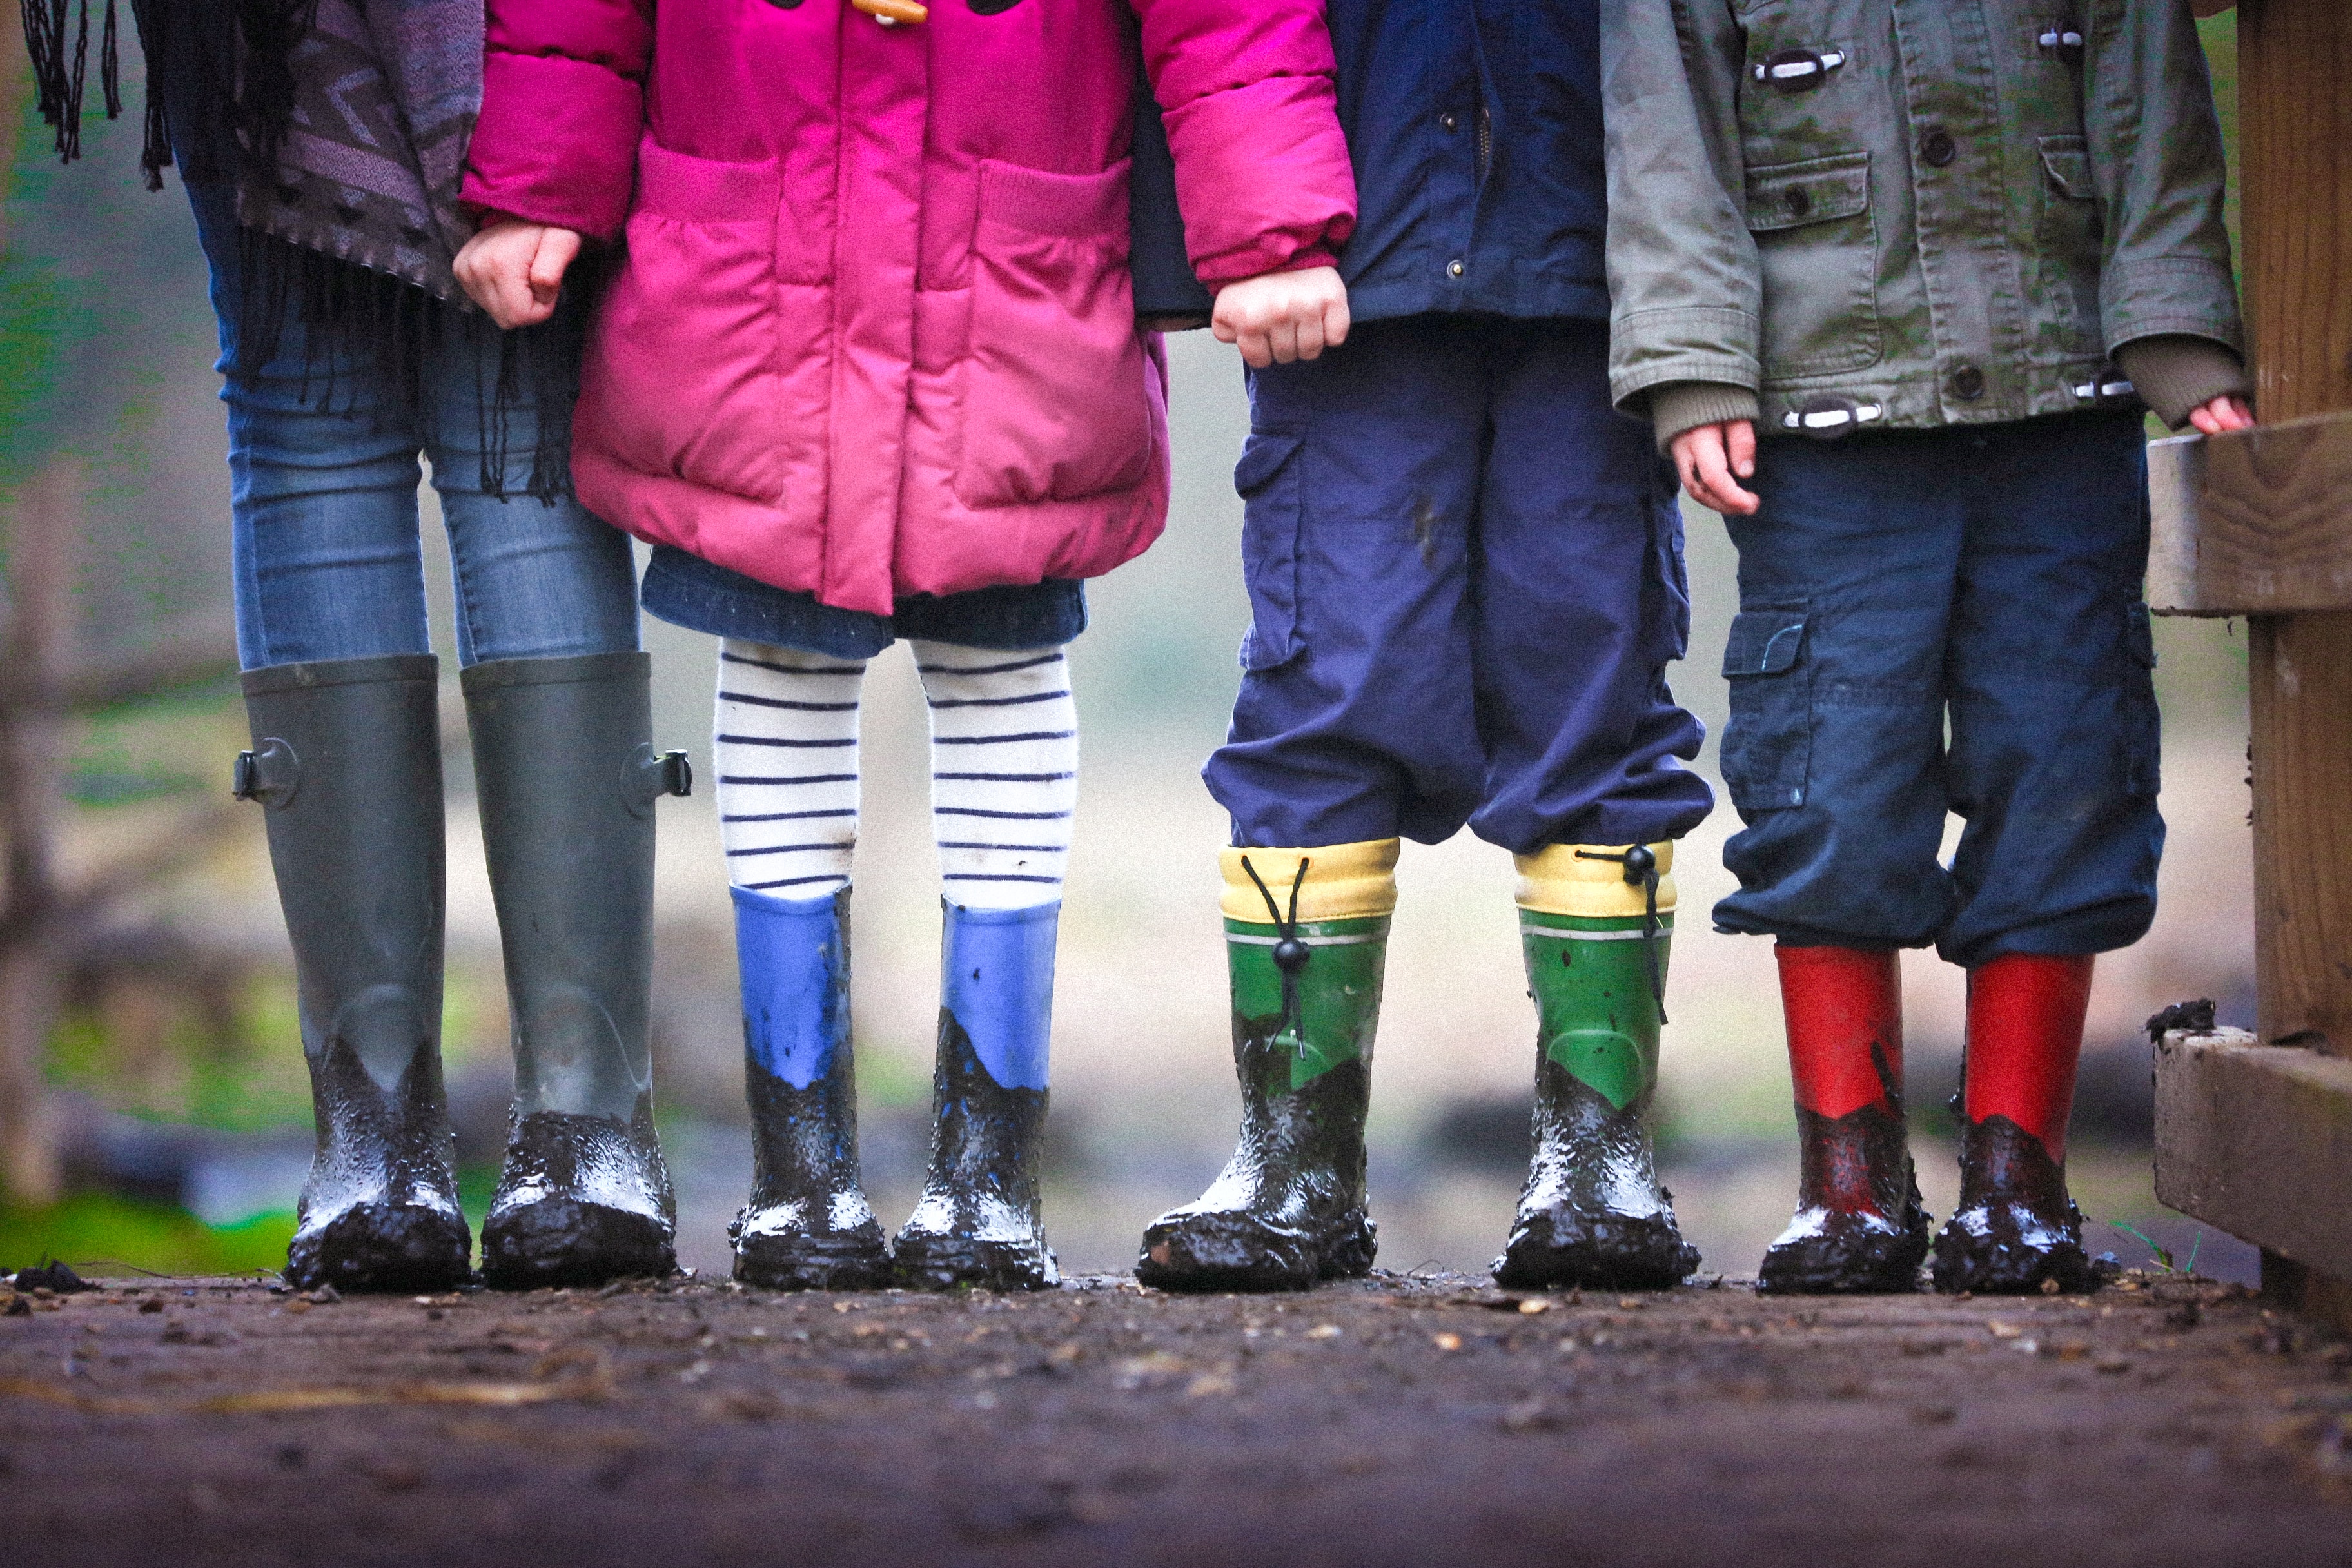 A row of people wearing wellies